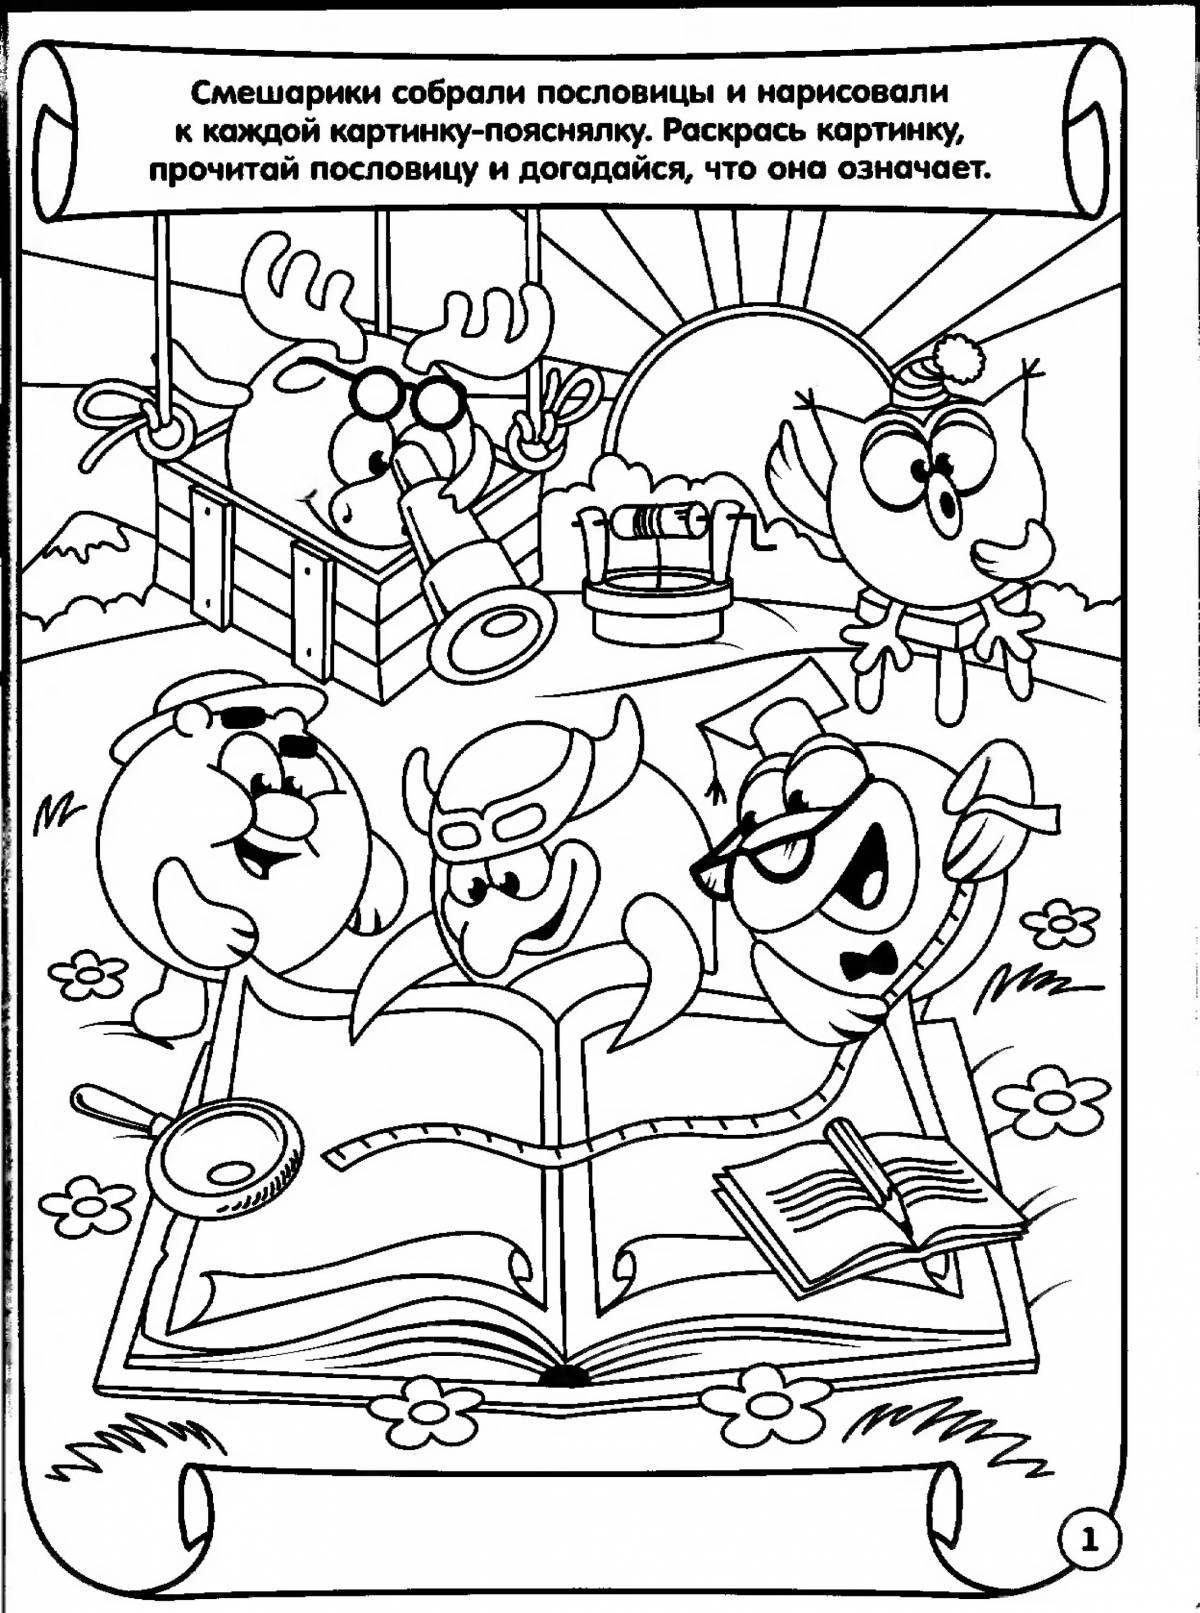 Coloring book alluring proverbs and sayings